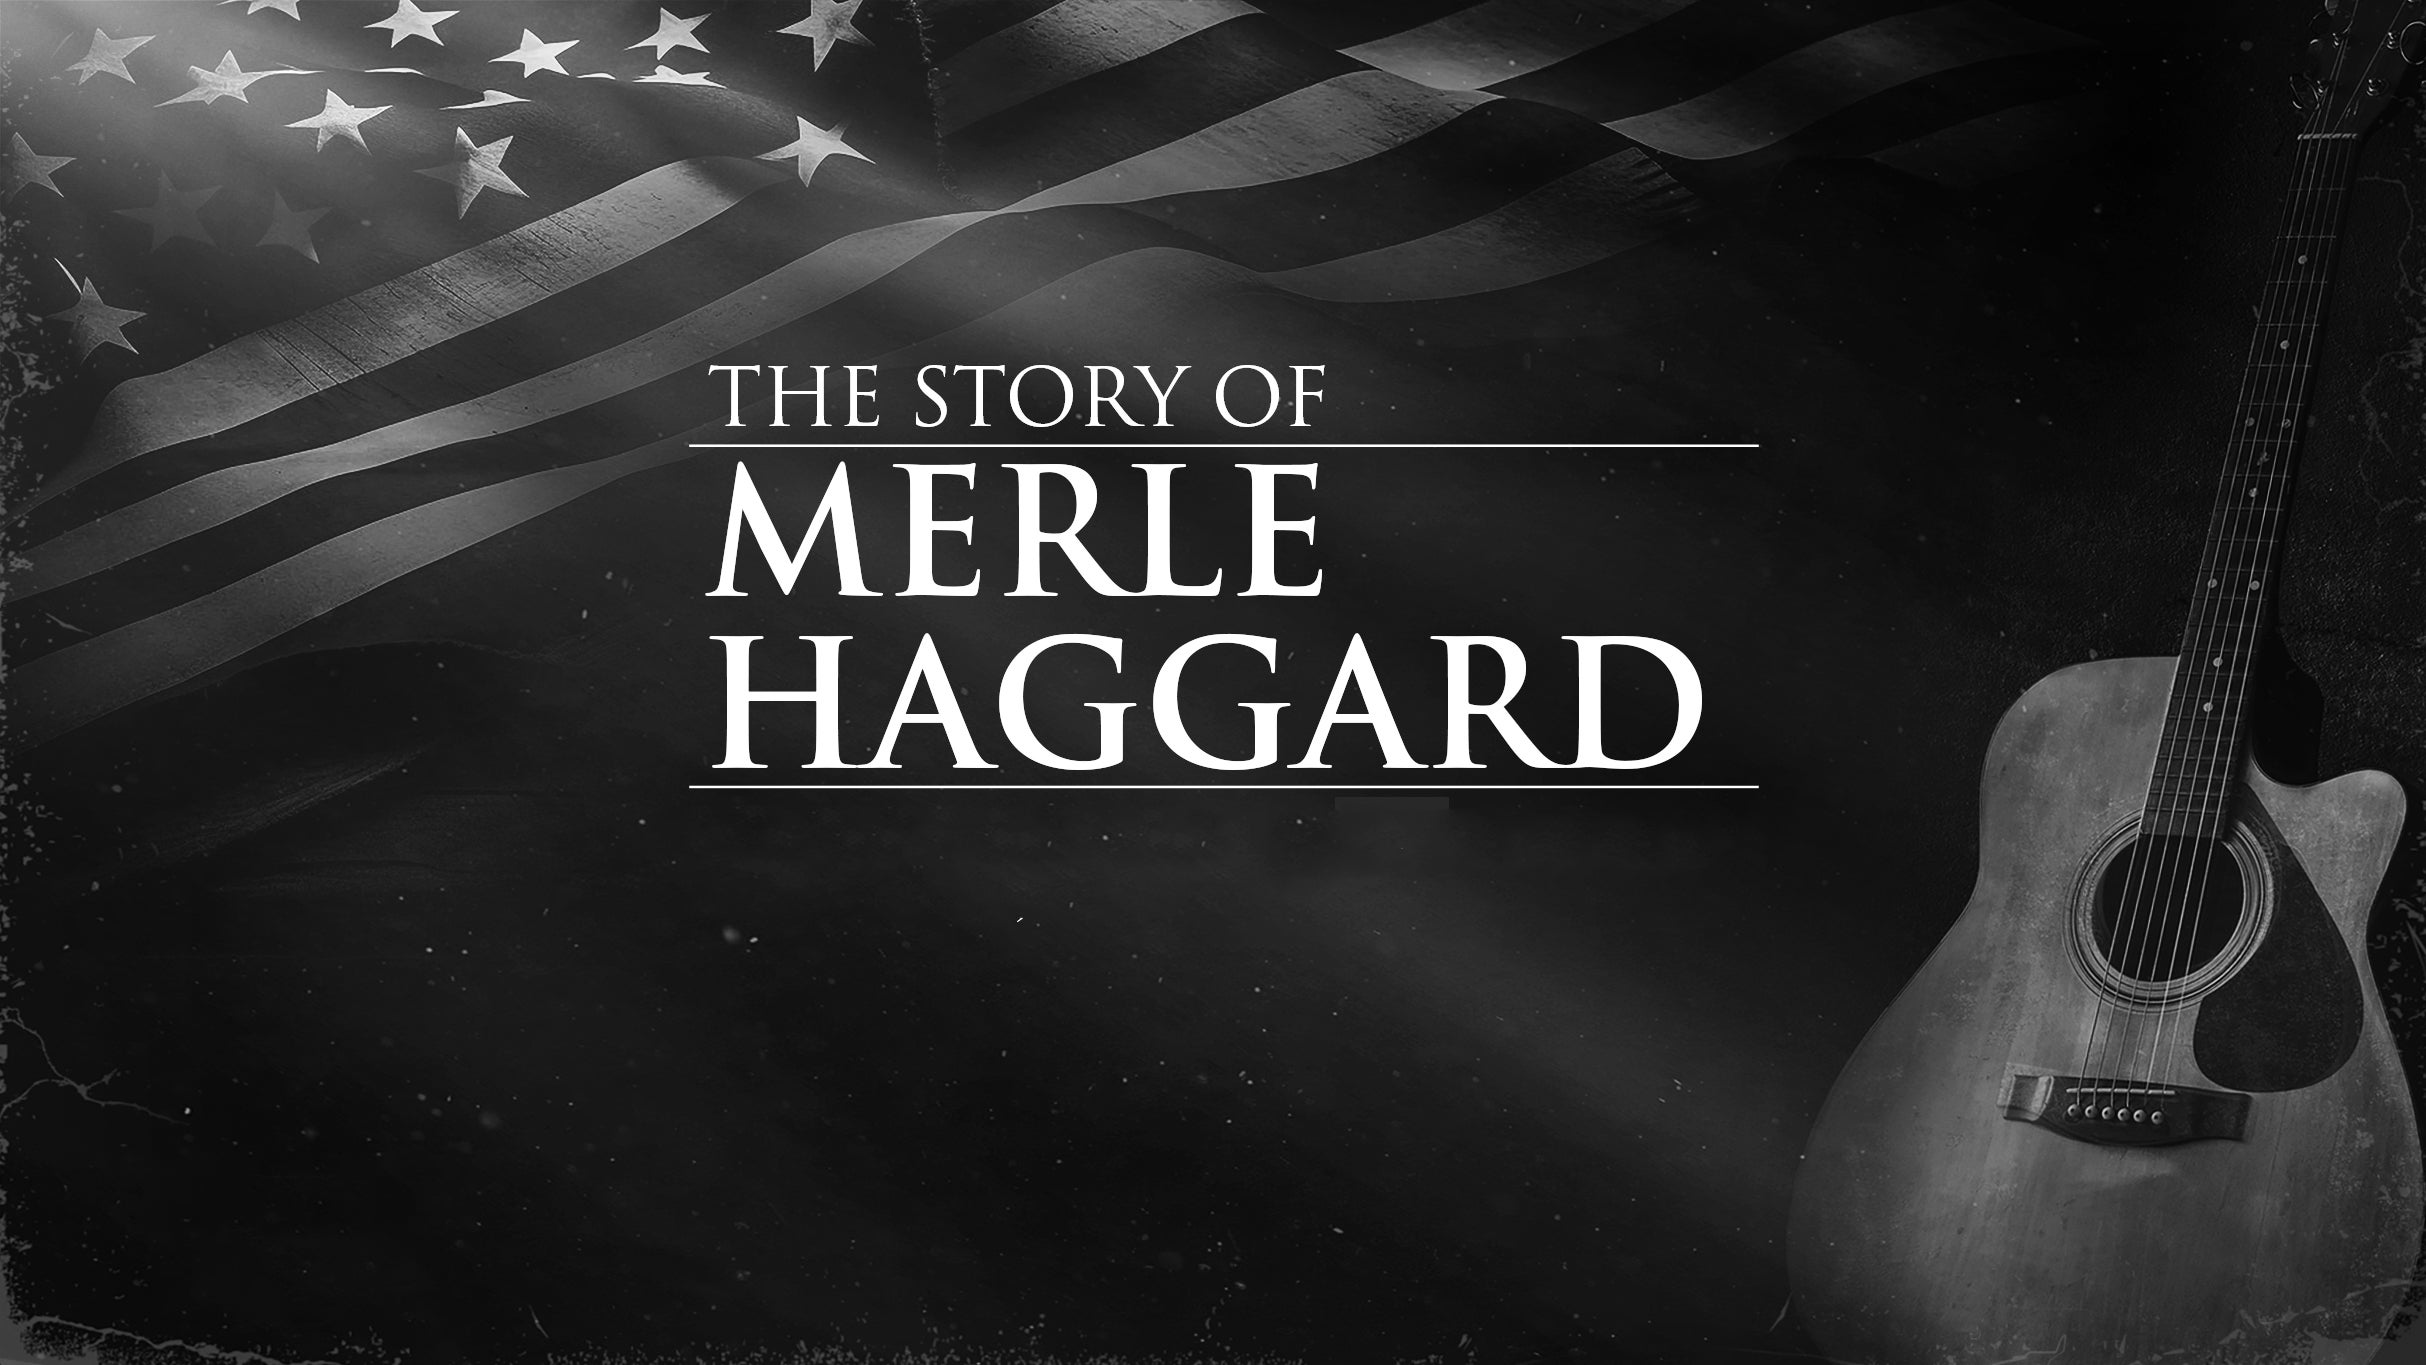 The Story of Merle Haggard pre-sale password for approved tickets in Calgary